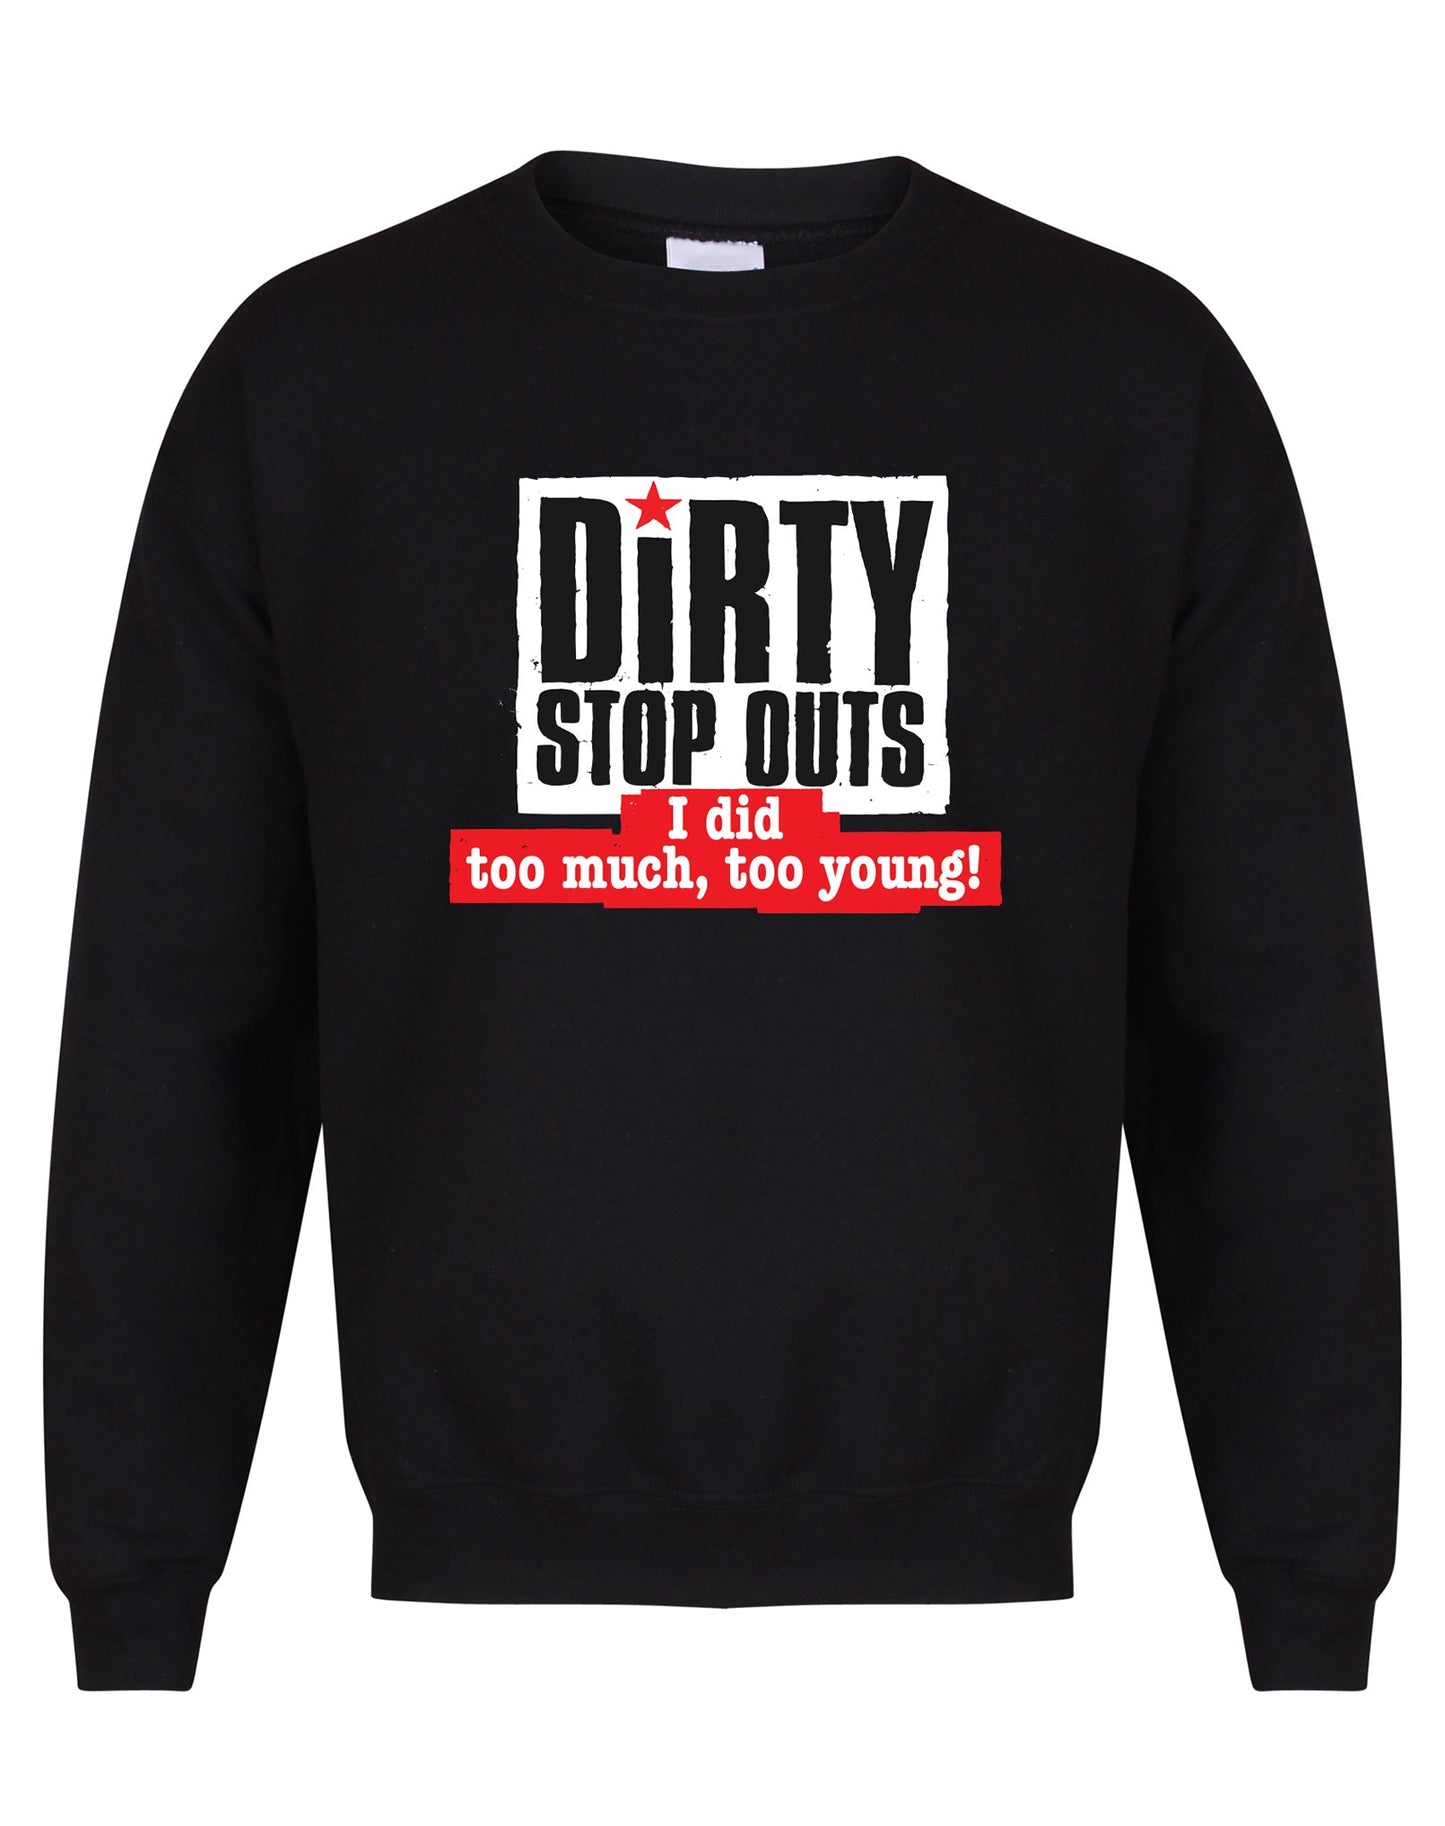 "I did too much, too young!" sweatshirt - various colours - Dirty Stop Outs